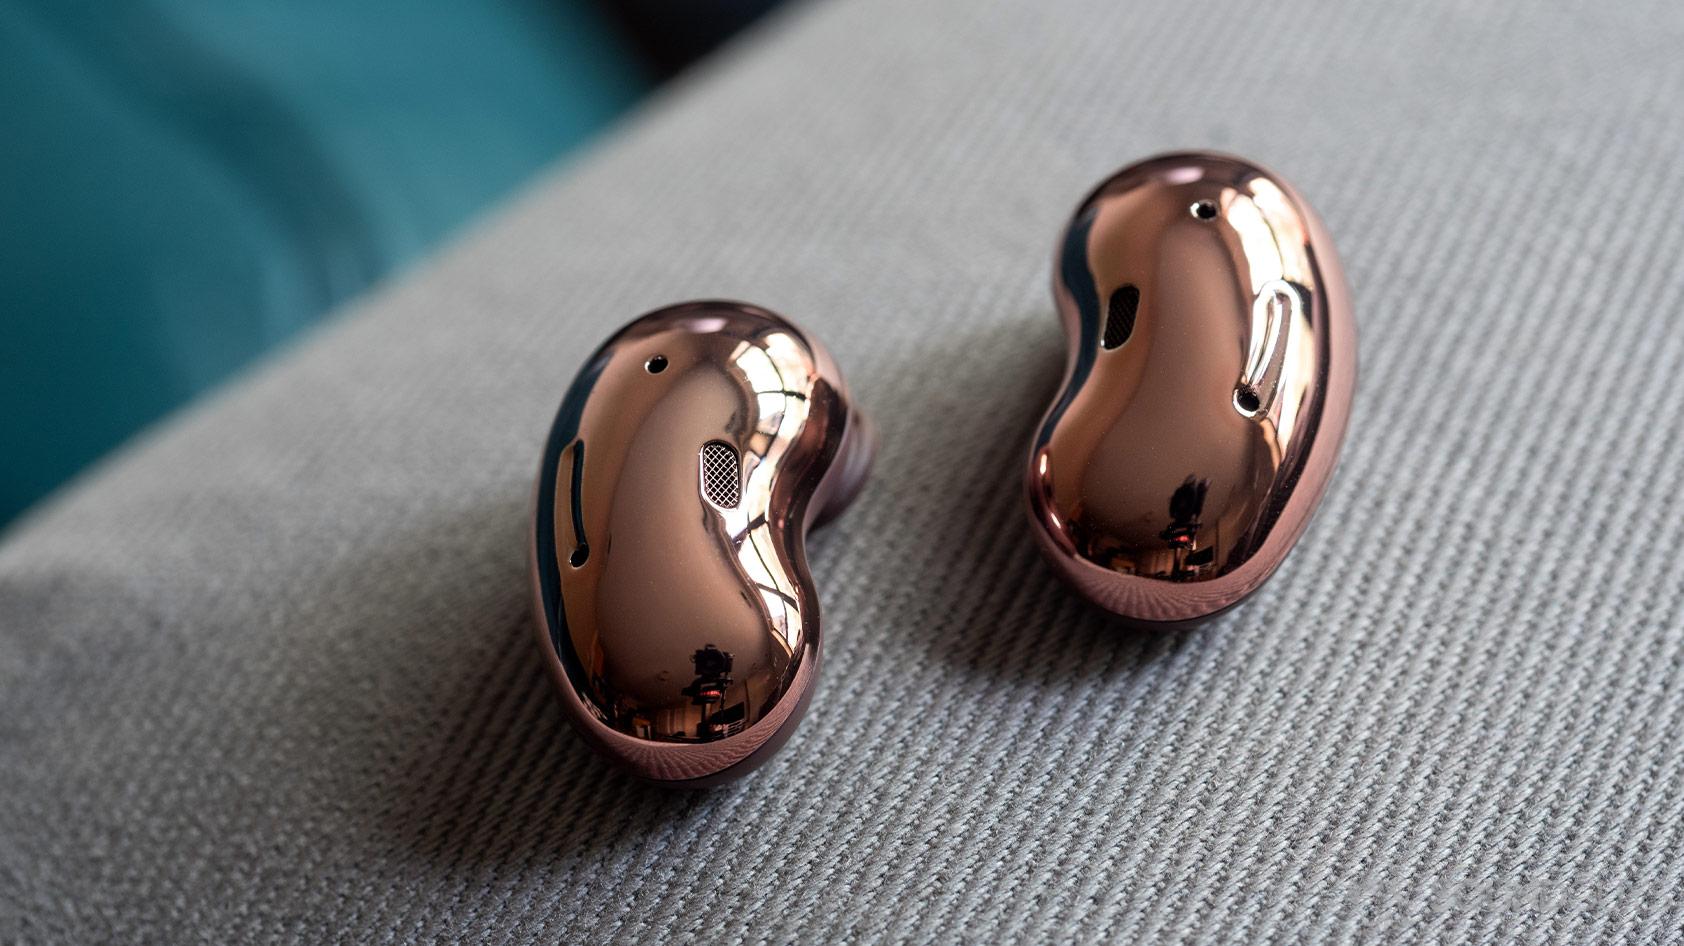 A picture of the Samsung Galaxy Buds Live noise canceling true wireless earbuds bean shaped, reflective exteriors for a comparison in the Apple AirPods vs Samsung Galaxy Buds Live breakdown.